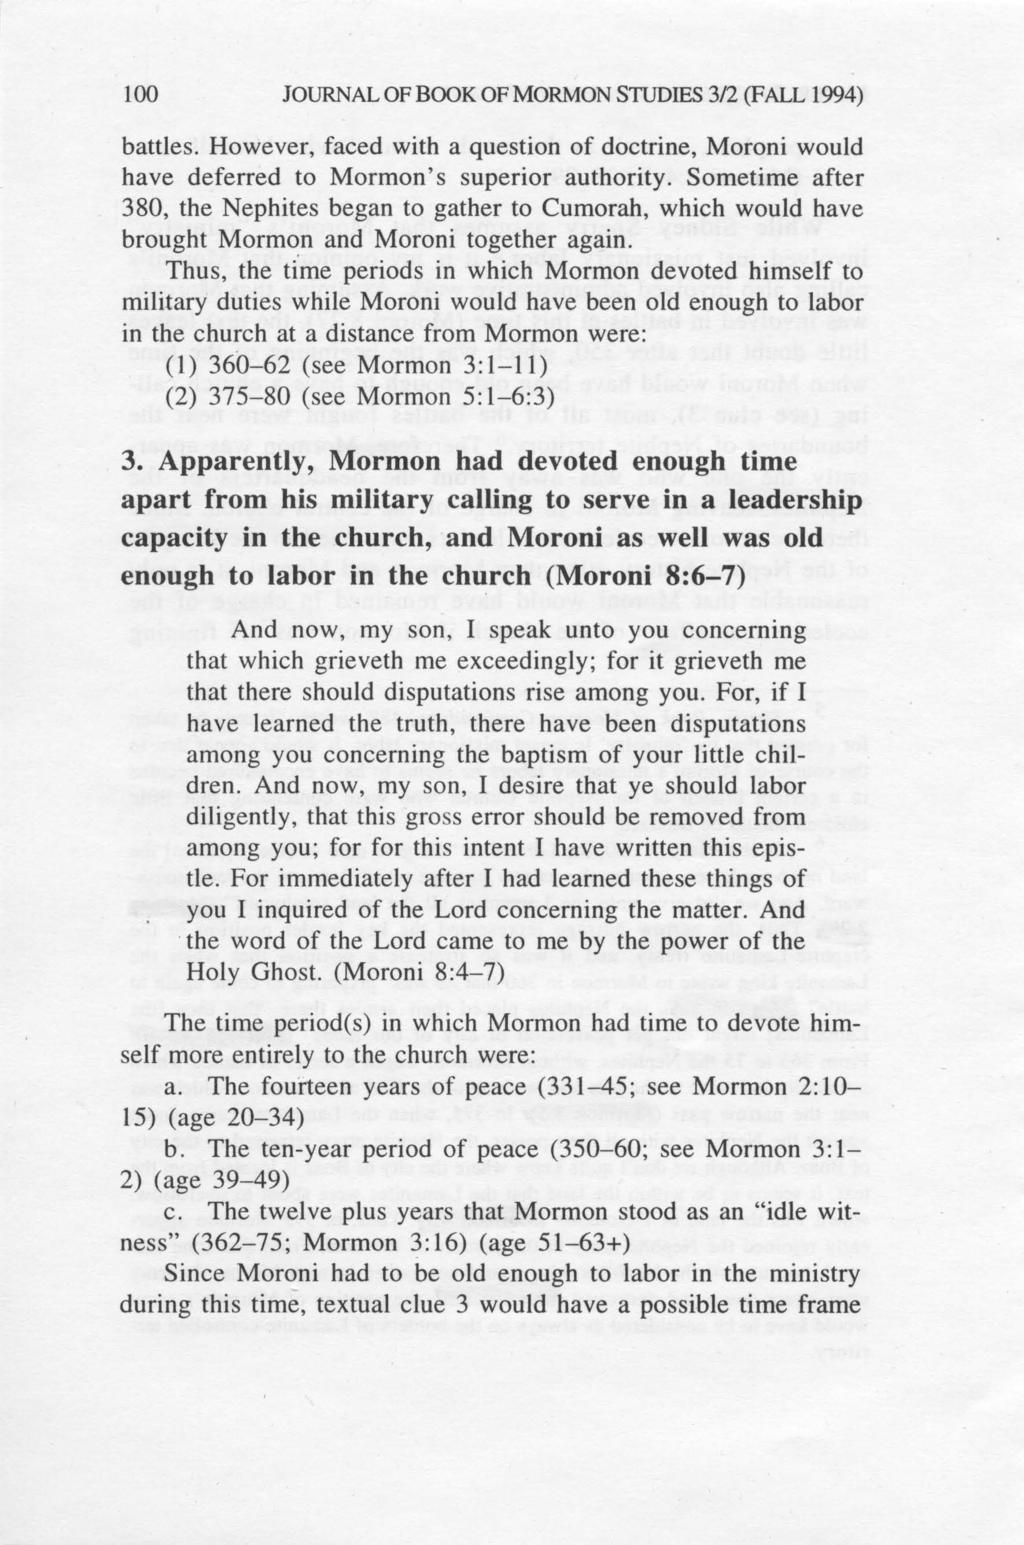 100 JoURNAL OF BOOK OF MORMON STUDES 3/2 (FALL 1994) battles. However, faced with a question of doctrine, Moroni would have deferred to Mormon's superior authority.